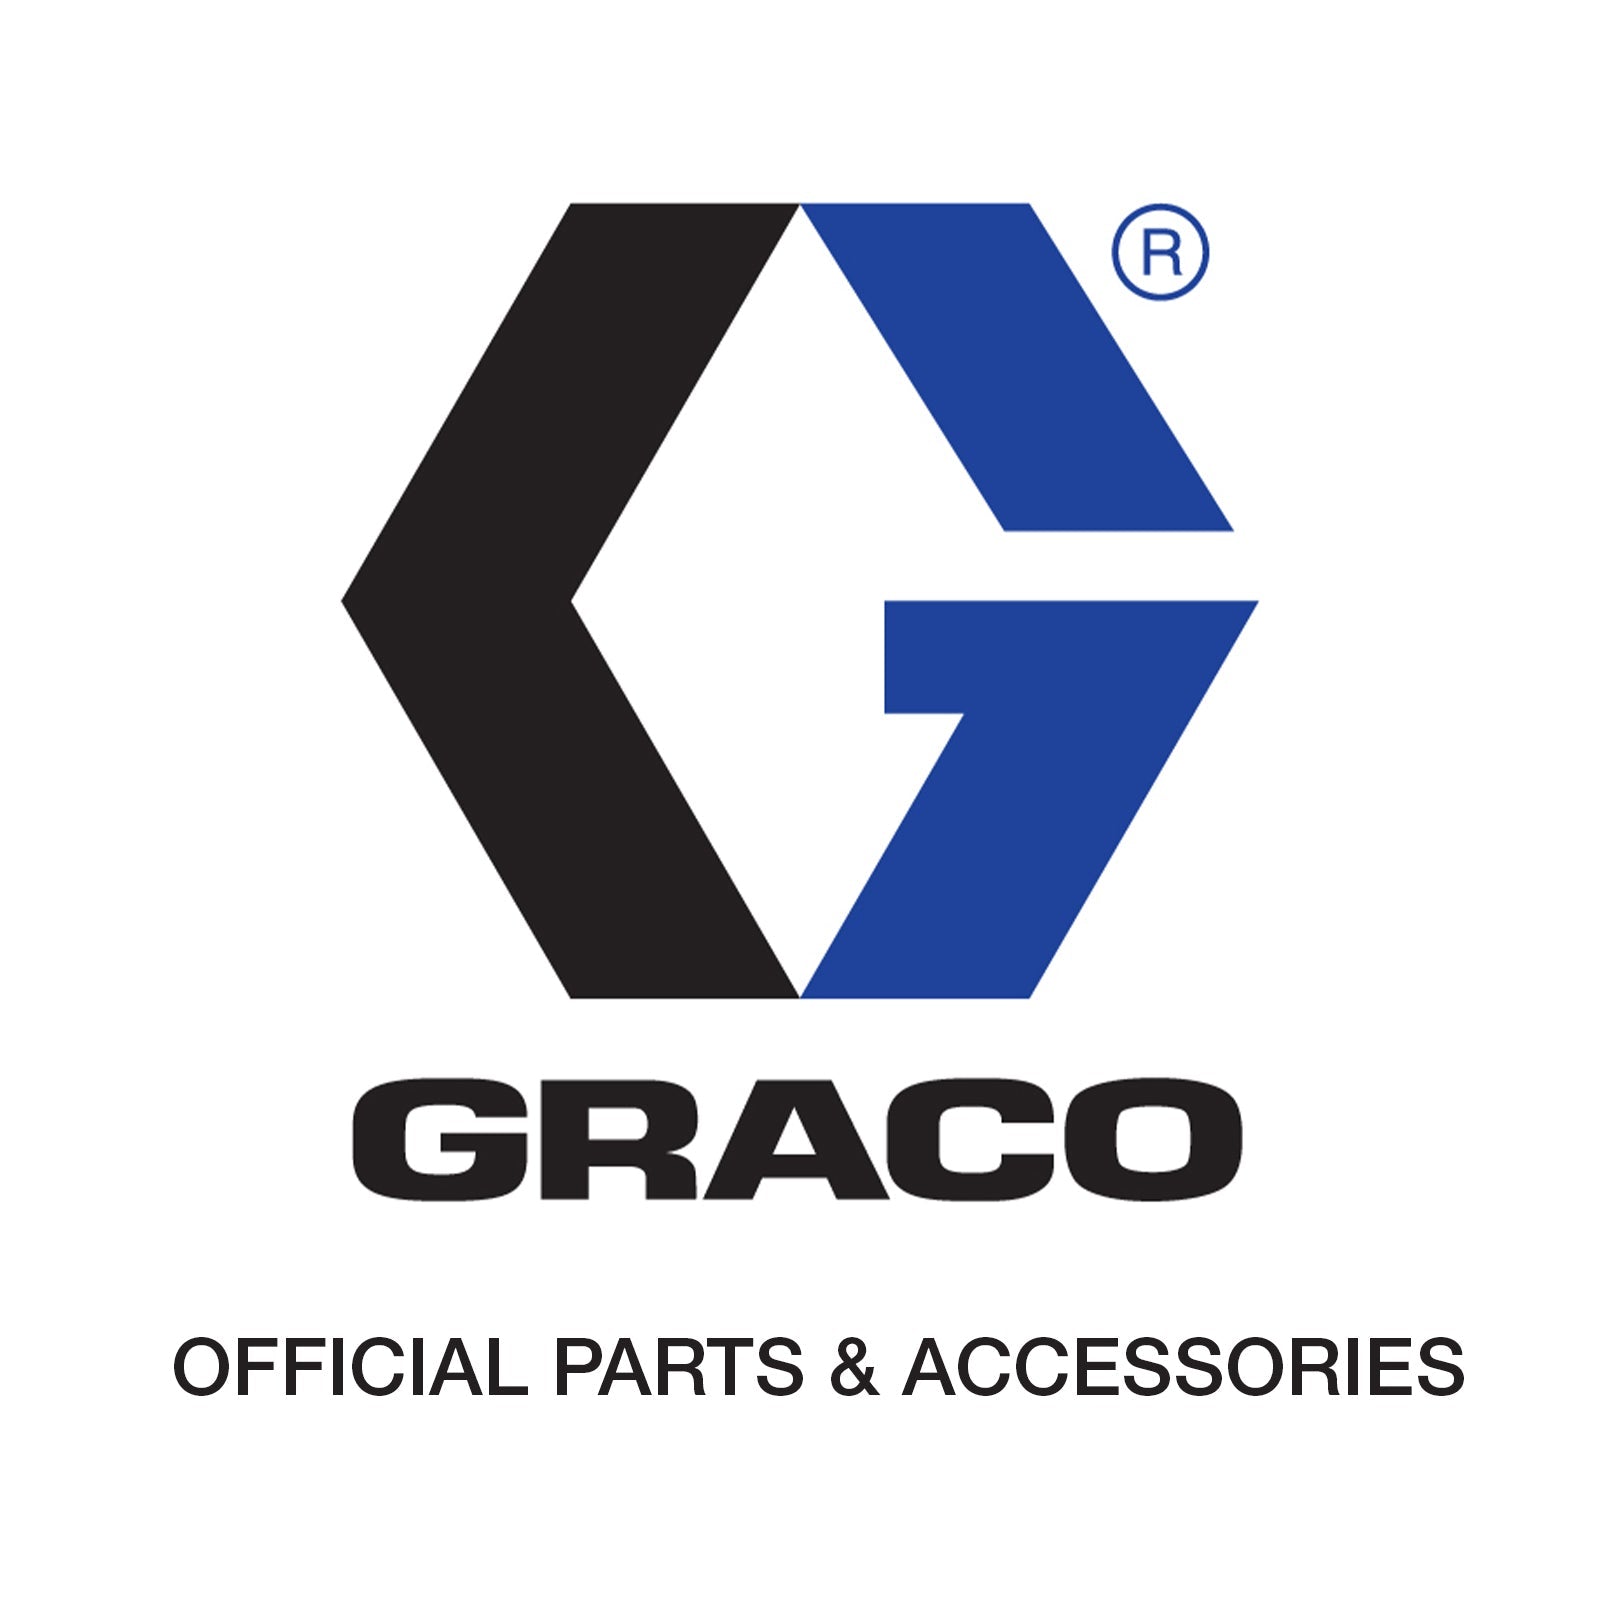 Graco Official Parts & Accessories